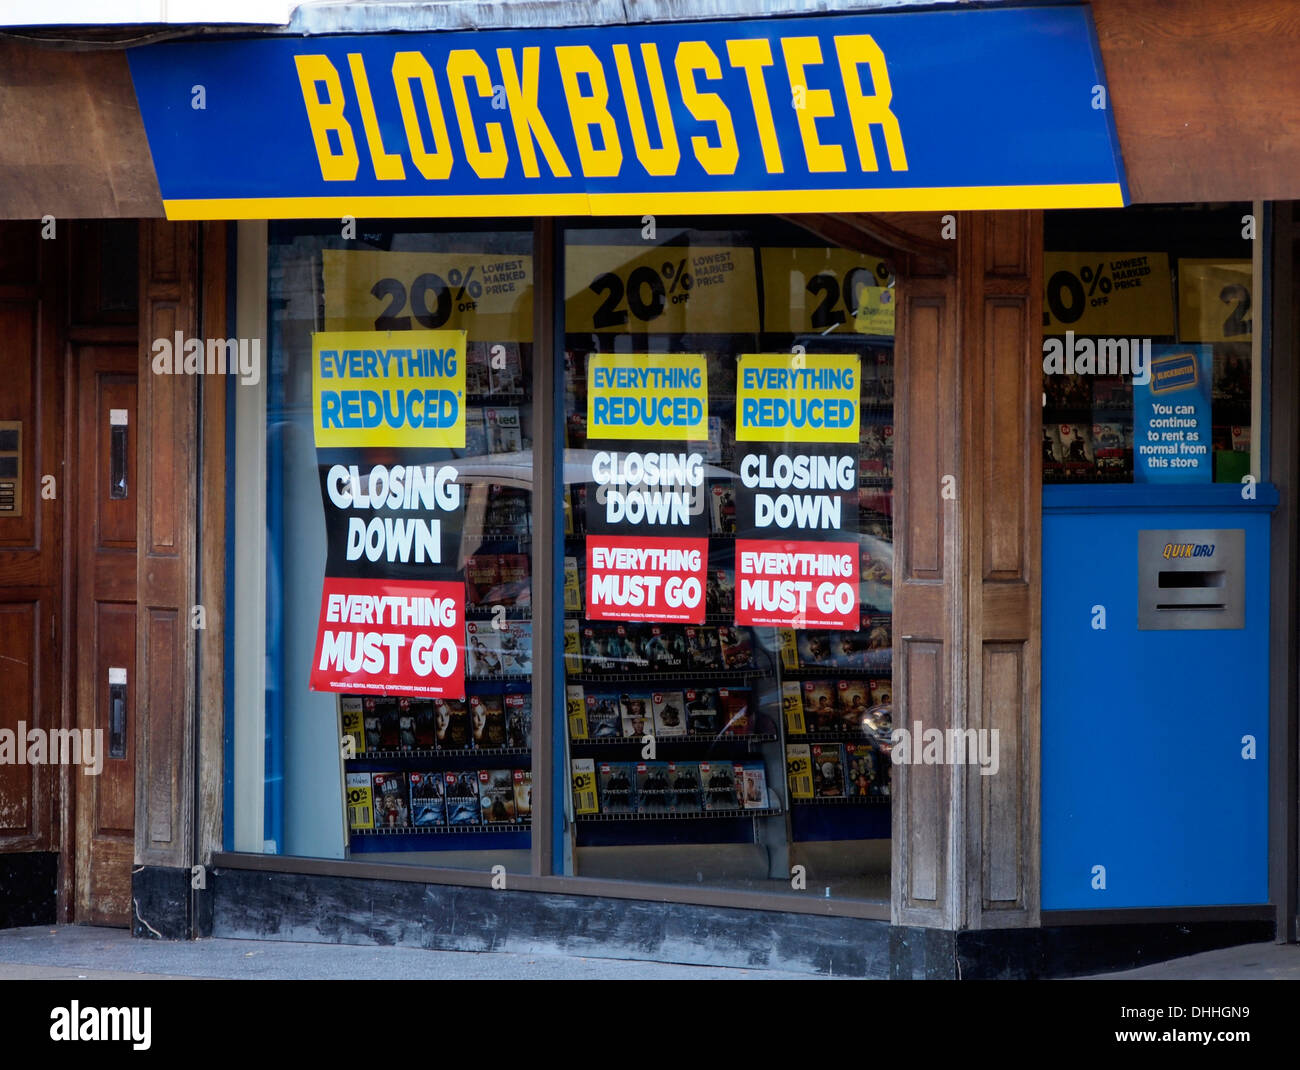 A Blockbuster store closing down sale. This particular store is in Winchester, Hampshire. Stock Photo